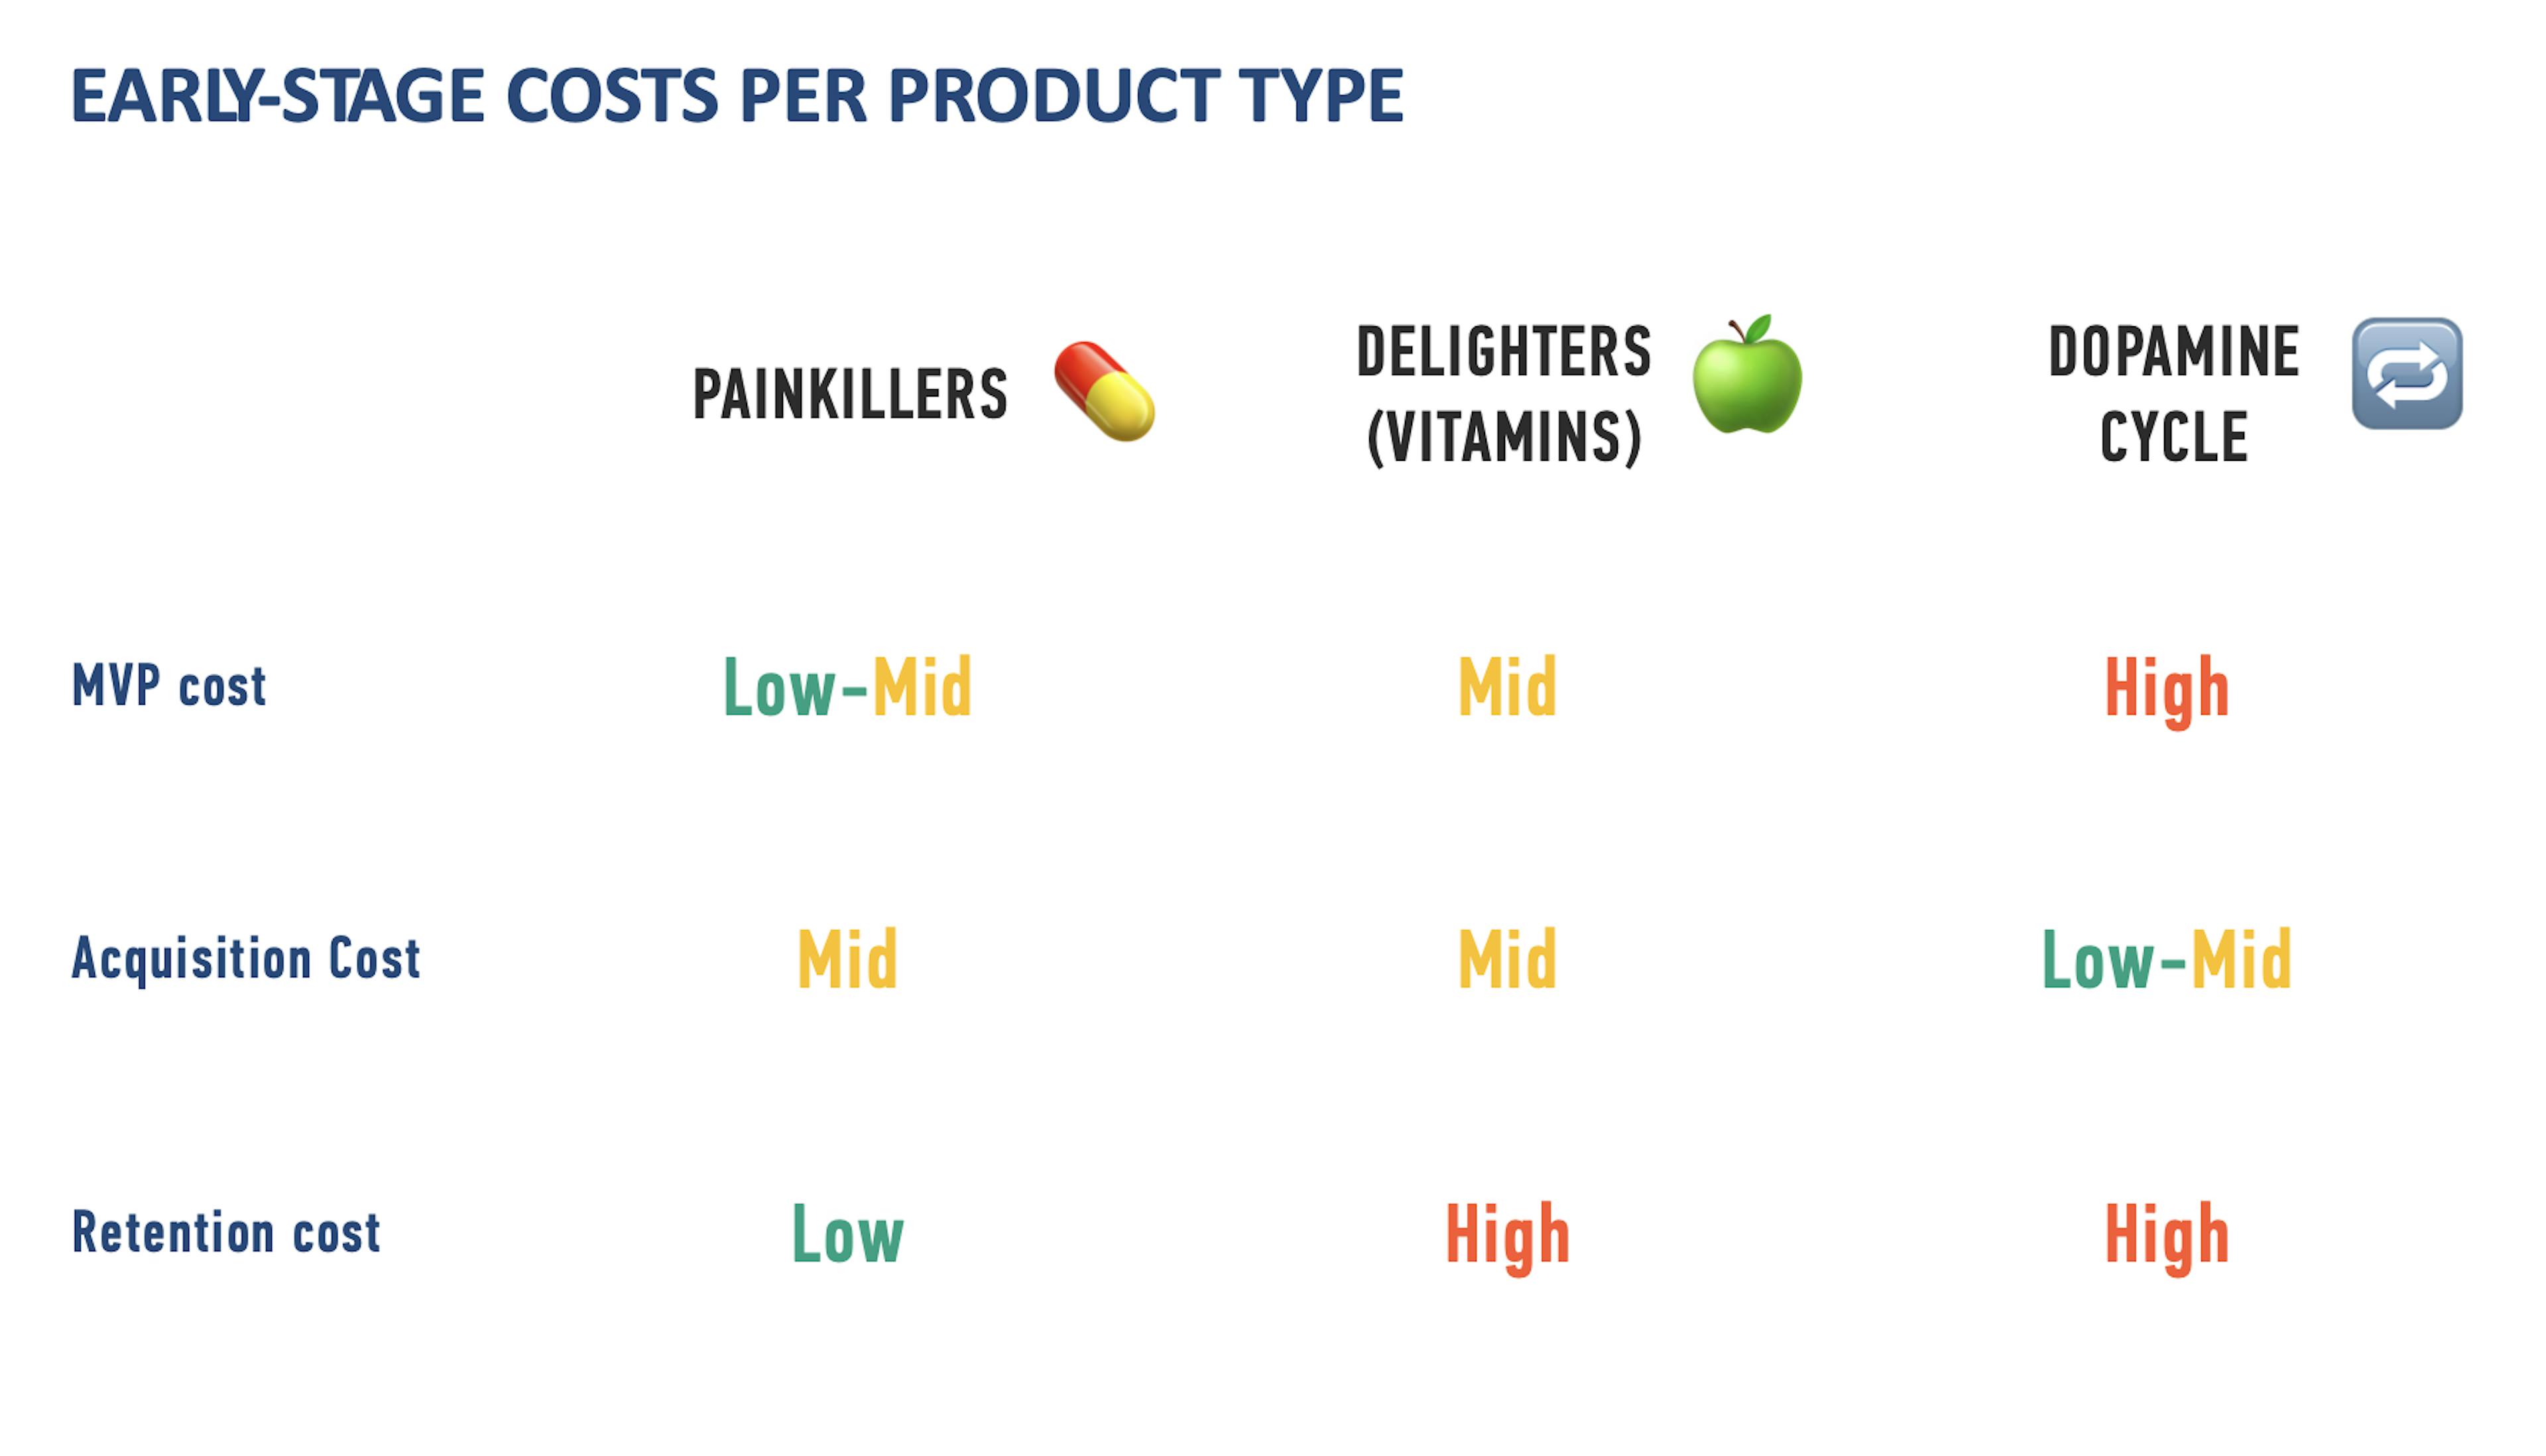 Step 2. Cost groups estimate per product type